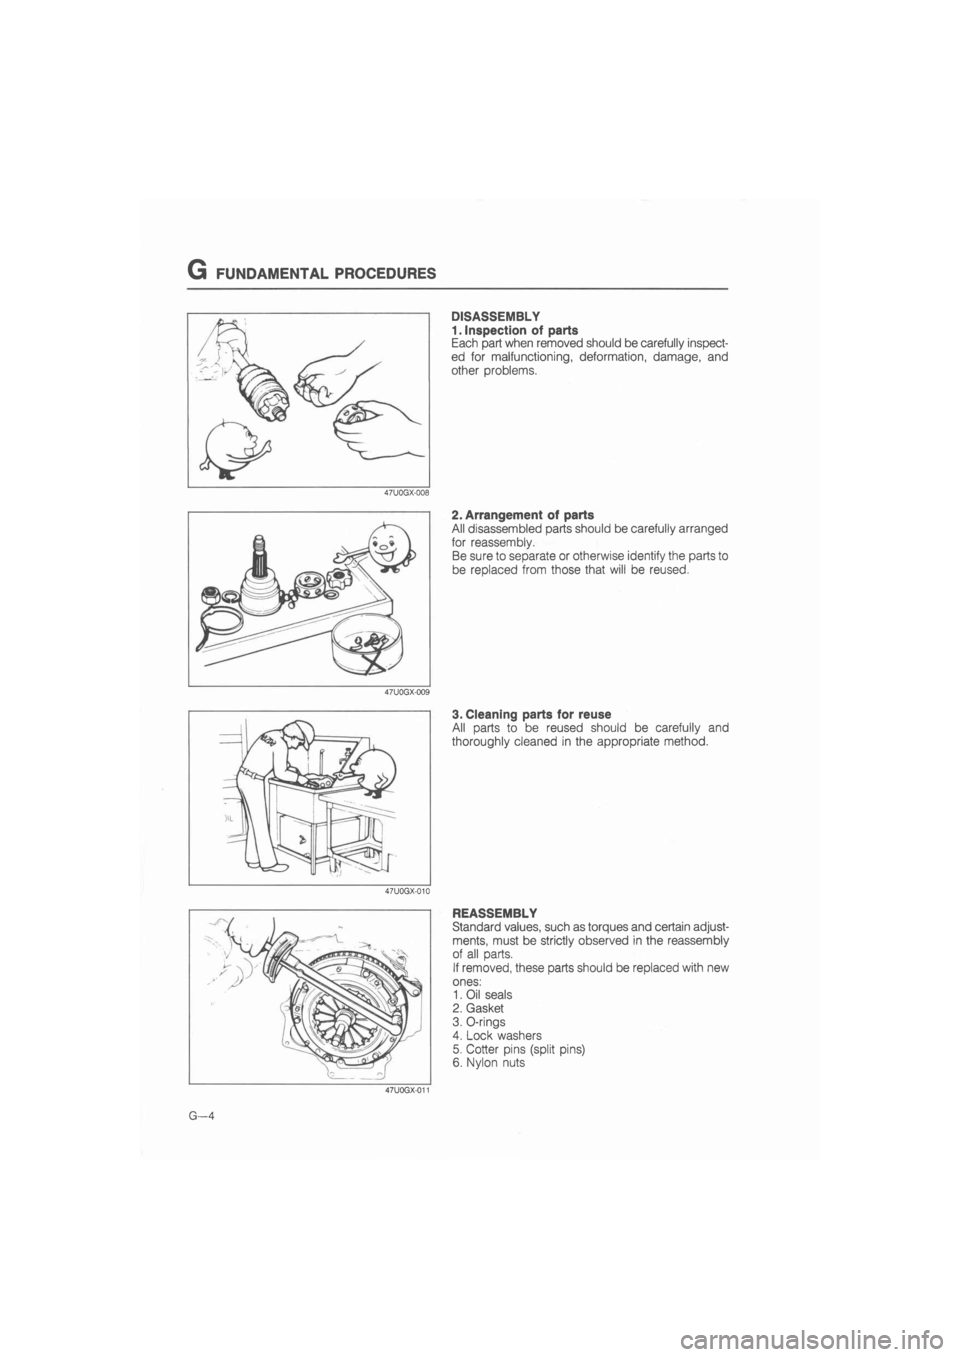 MAZDA 626 1987  Workshop Manual 
G FUNDAMENTAL PROCEDURES 
DISASSEMBLY 
1. Inspection of parts 
Each part when removed should be carefully inspect-
ed for malfunctioning, deformation, damage, and 
other problems. 
2. Arrangement of 